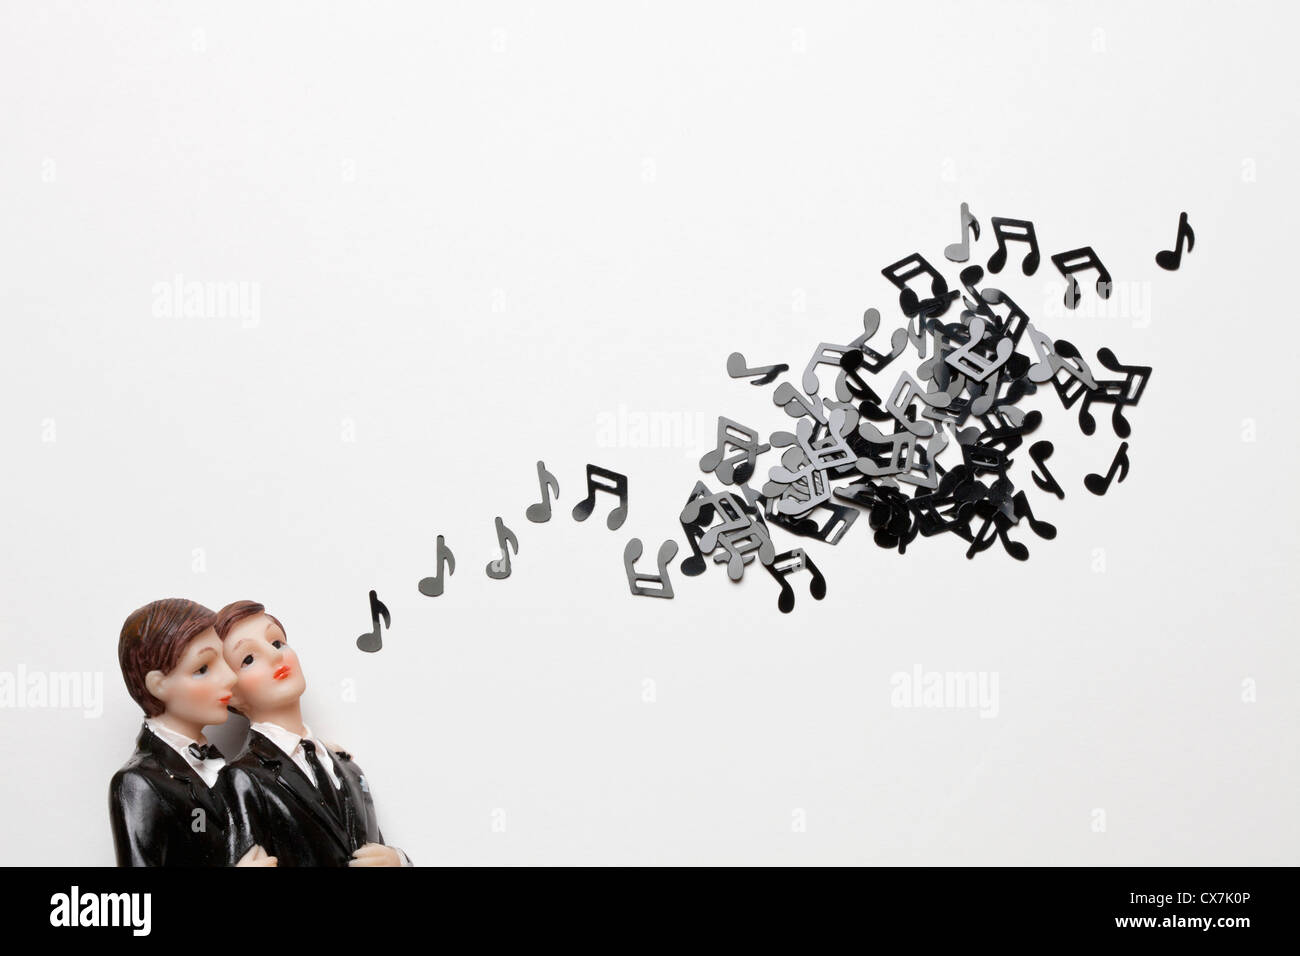 Two male figurines next to a group of musical notes Stock Photo